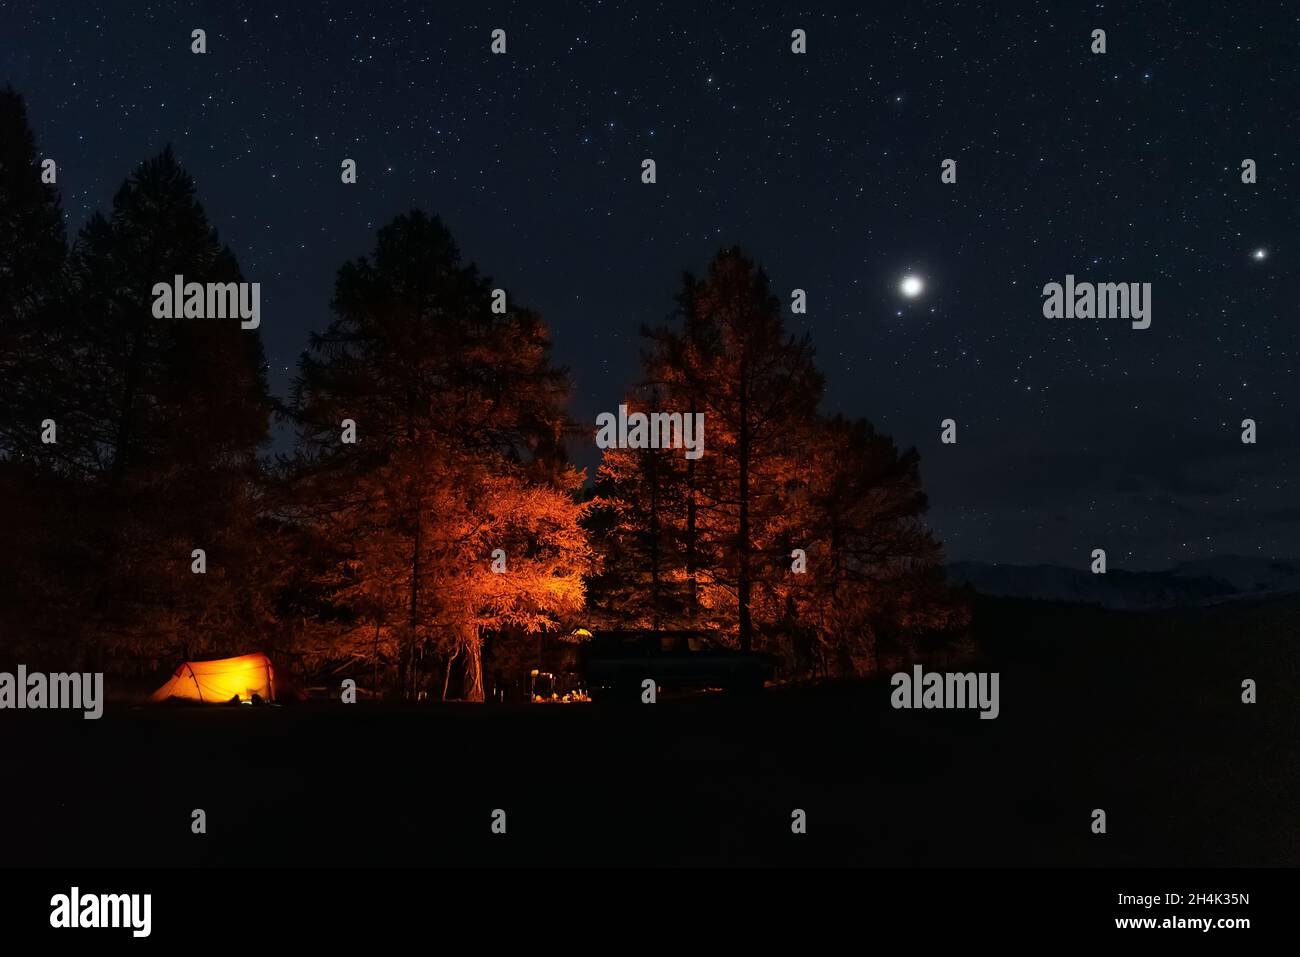 Scenic night view of tourist camp with illuminated orange tent, yellow larch trees, bonfire and car on top in mountains against starry sky Stock Photo